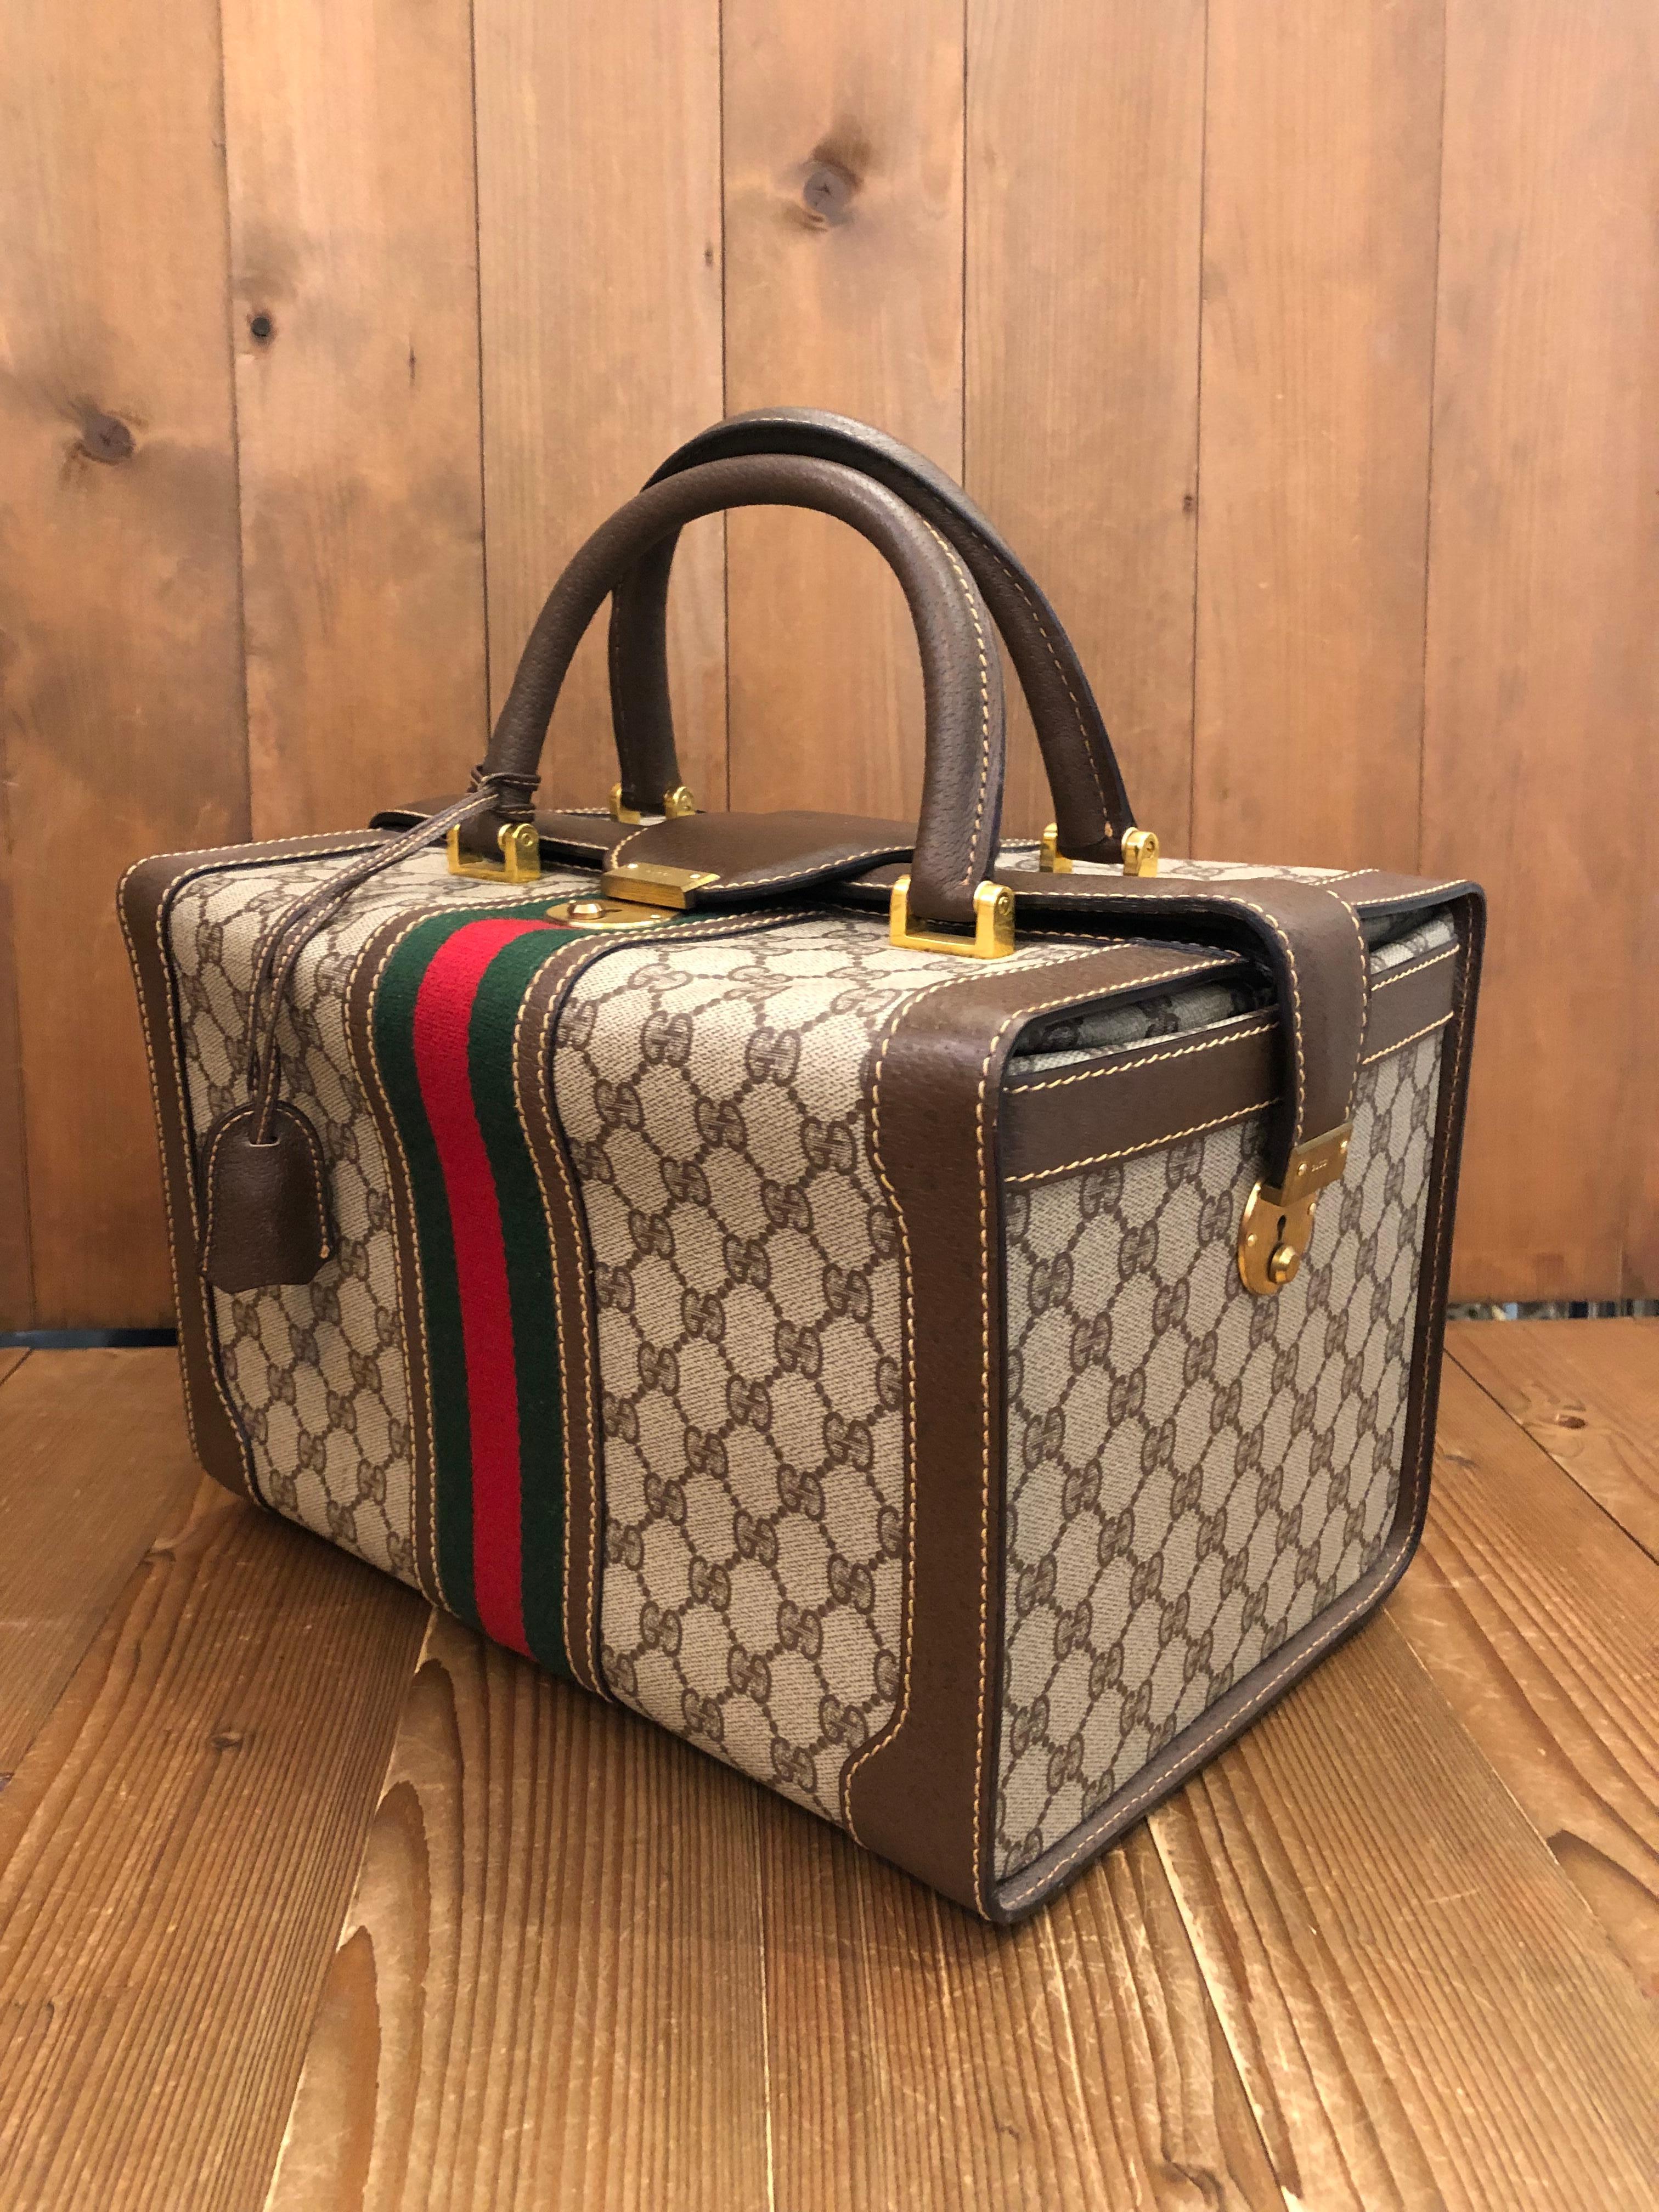 This 1980s vintage GUCCI soft-sided vanity trunk is crafted of GG monogram coated canvas in brown decorated with Gucci’s iconic red/green Web band trimmed with brown pigskin’s leather. This vanity bag features three locks with one on top and one on